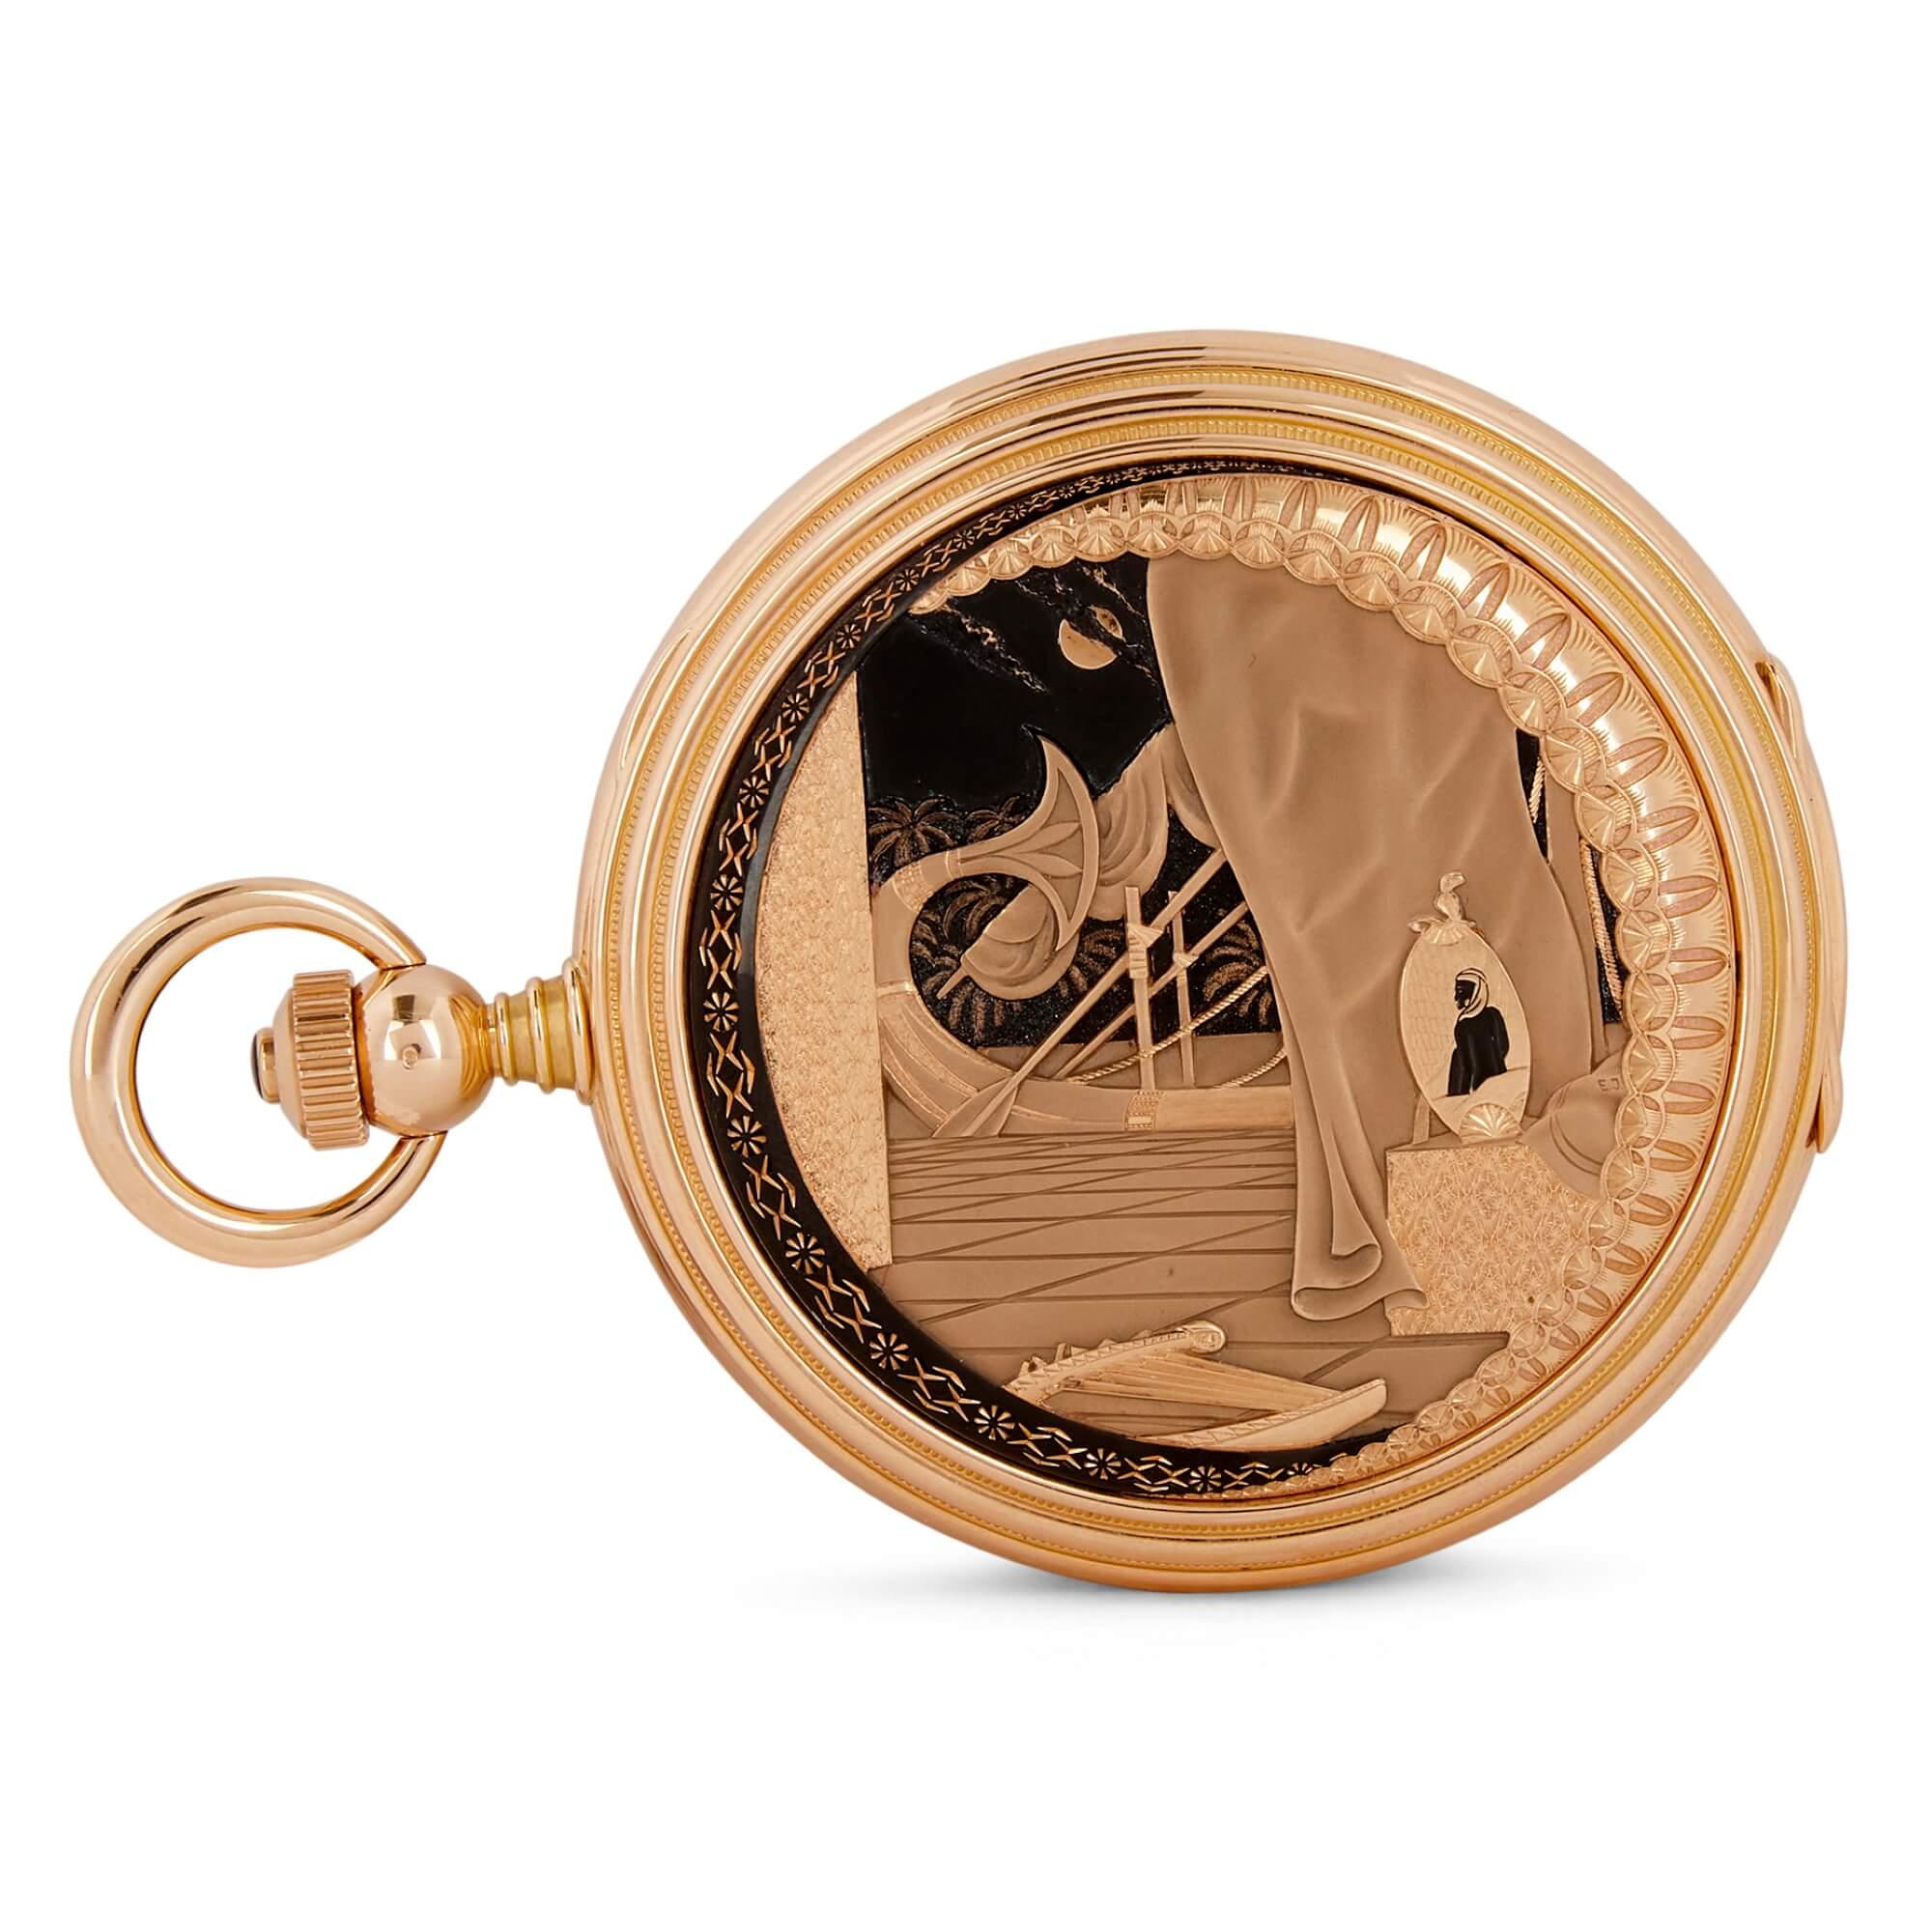 Parmigiani Fleurier, 'Nubia', Extremely Fine, Unique 18k Pink Gold Pocket Watch In Excellent Condition For Sale In London, GB